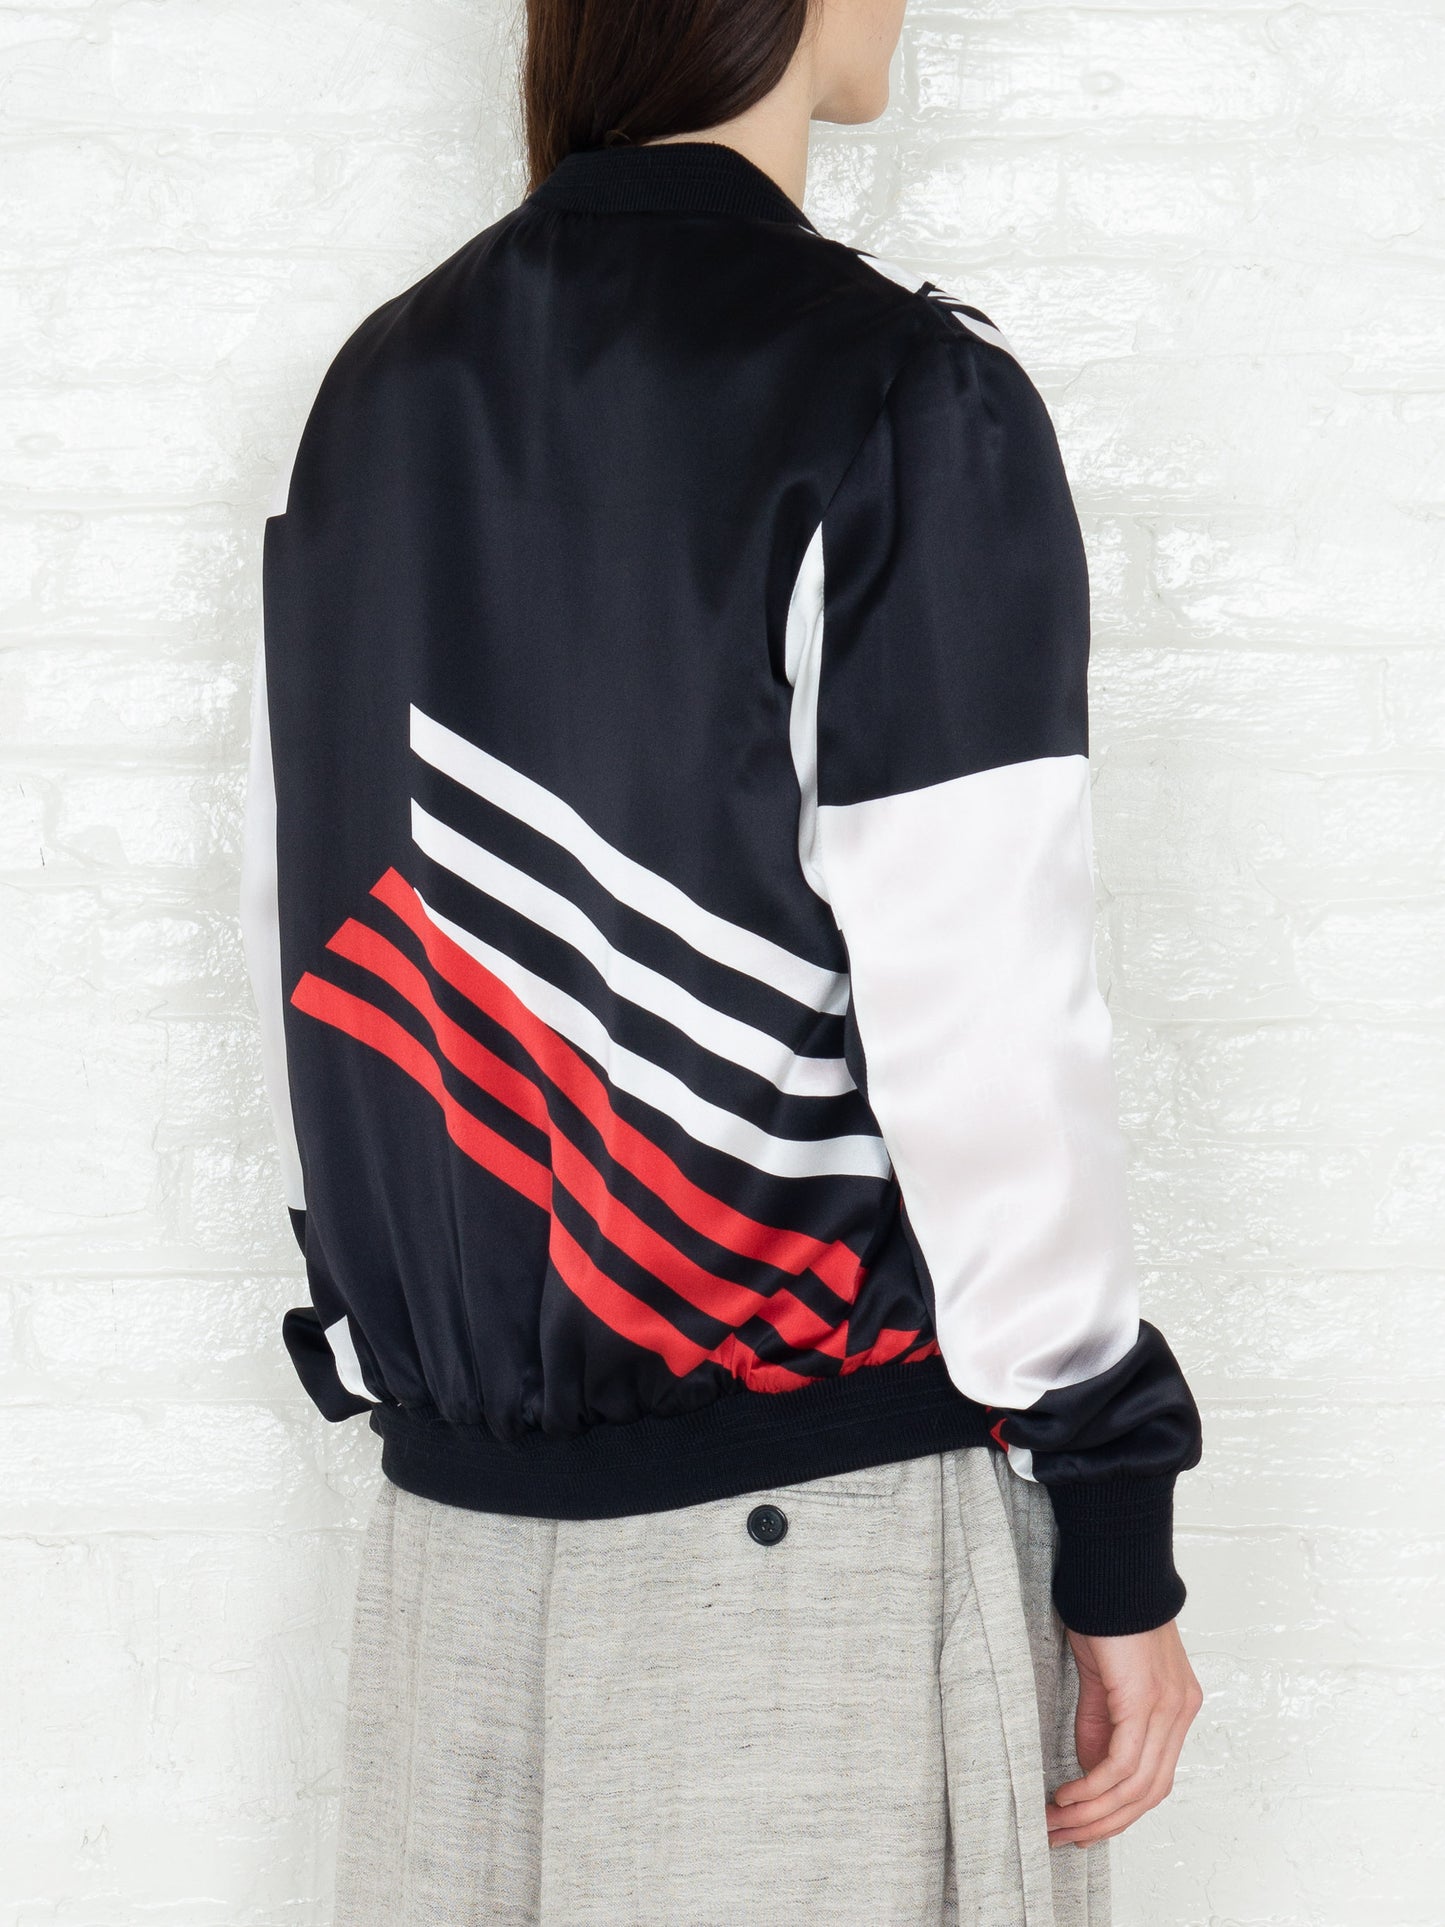 "The Classic Bomber" in Red Black & White Print